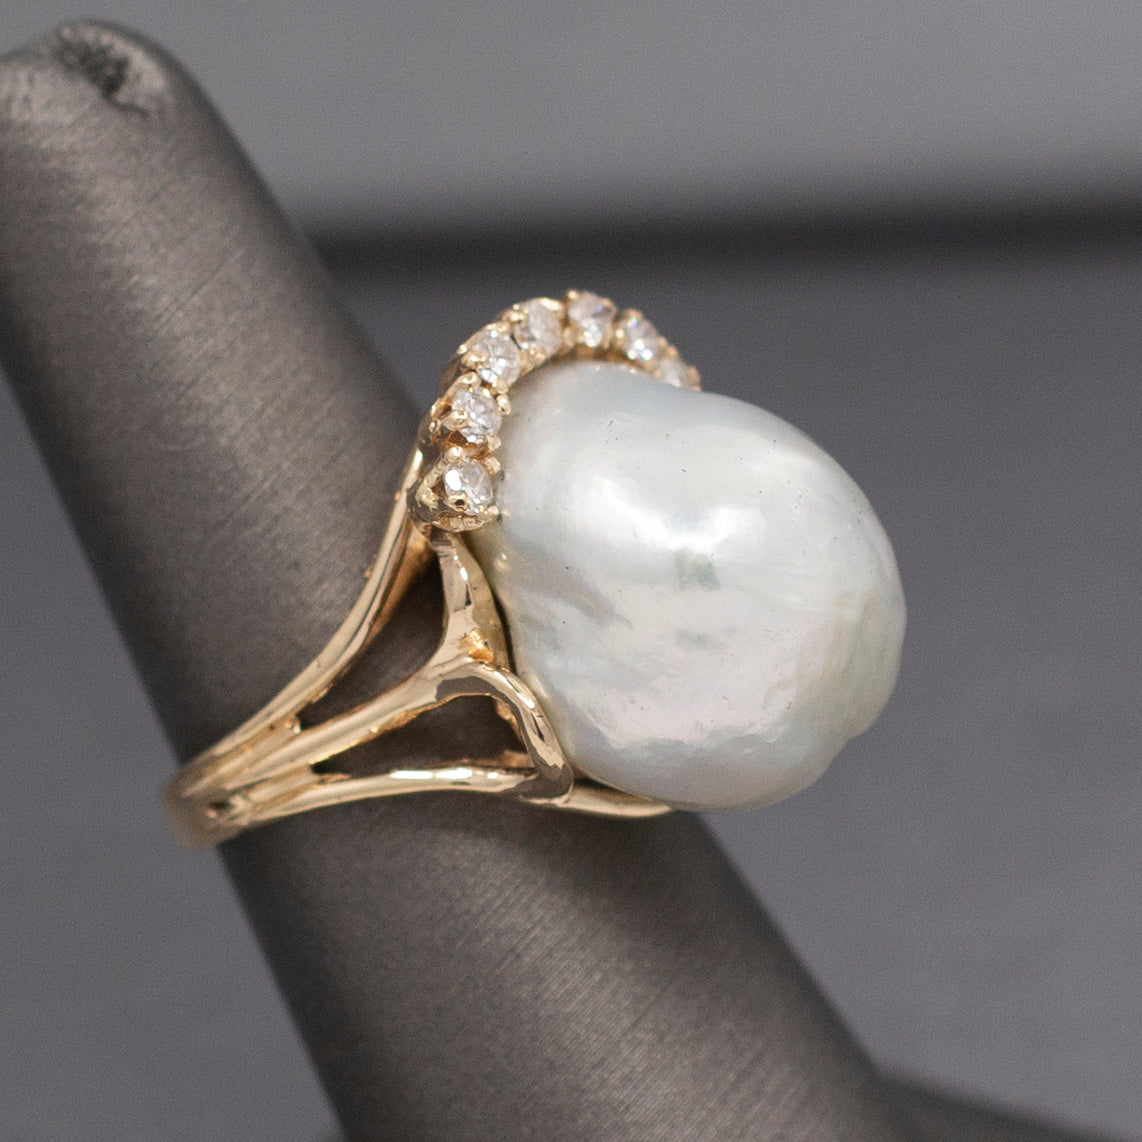 Stunning Baroque South Sea Pearl and Diamond Ring in 14k Yellow Gold